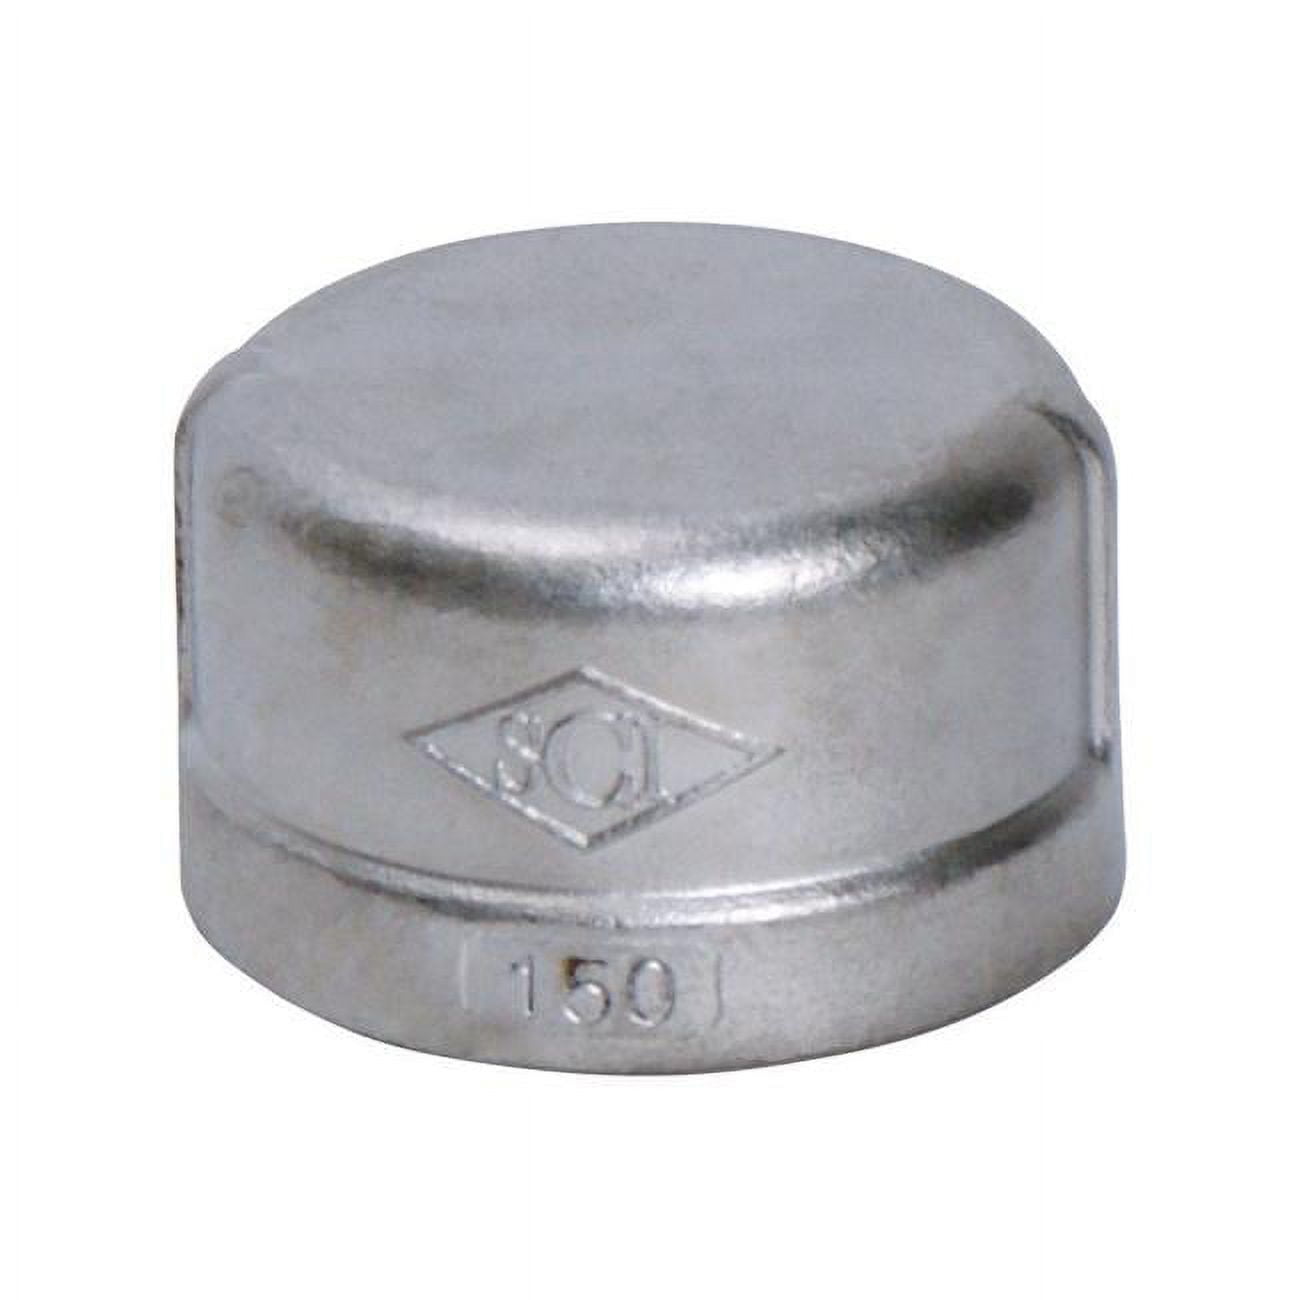 4809950 1 In. Stainless Steel Cap